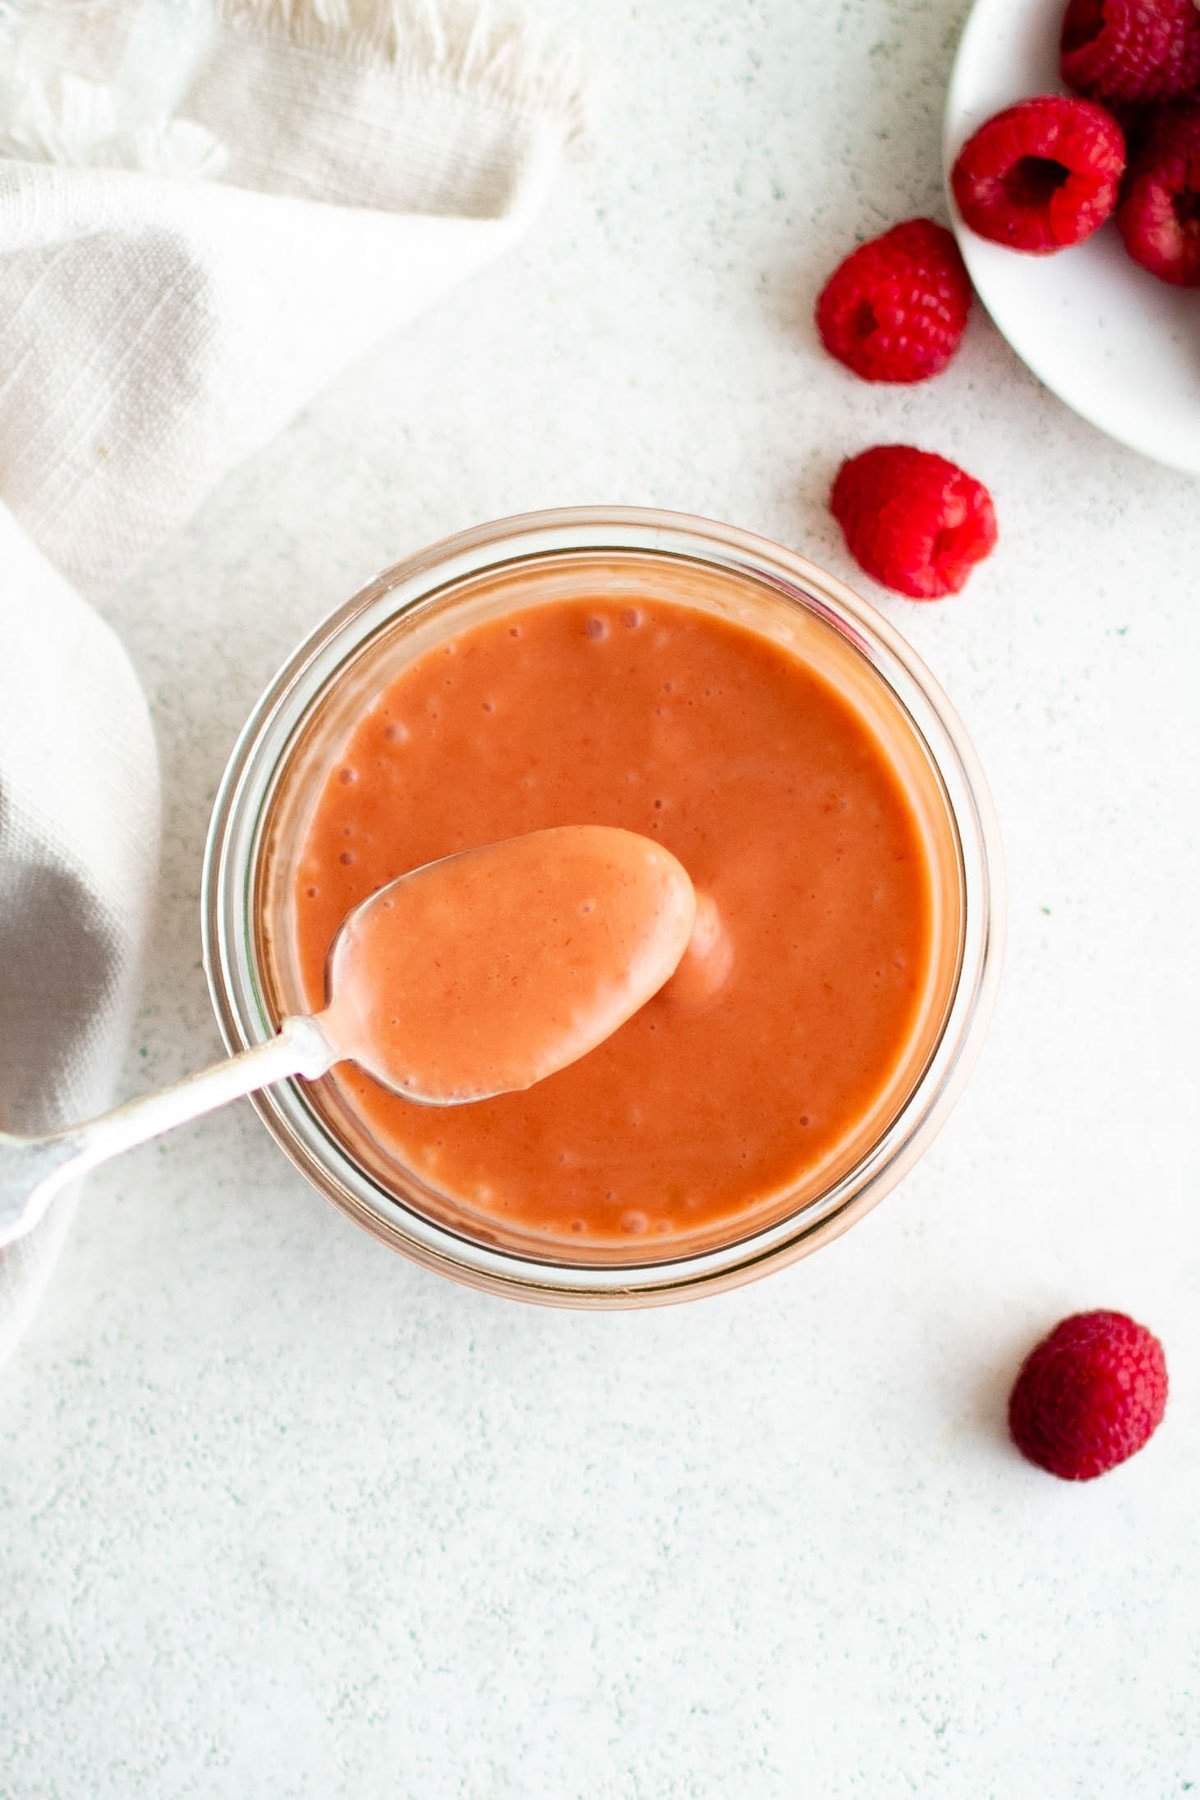 Raspberry vinaigrette dressing in a jar with a spoon.